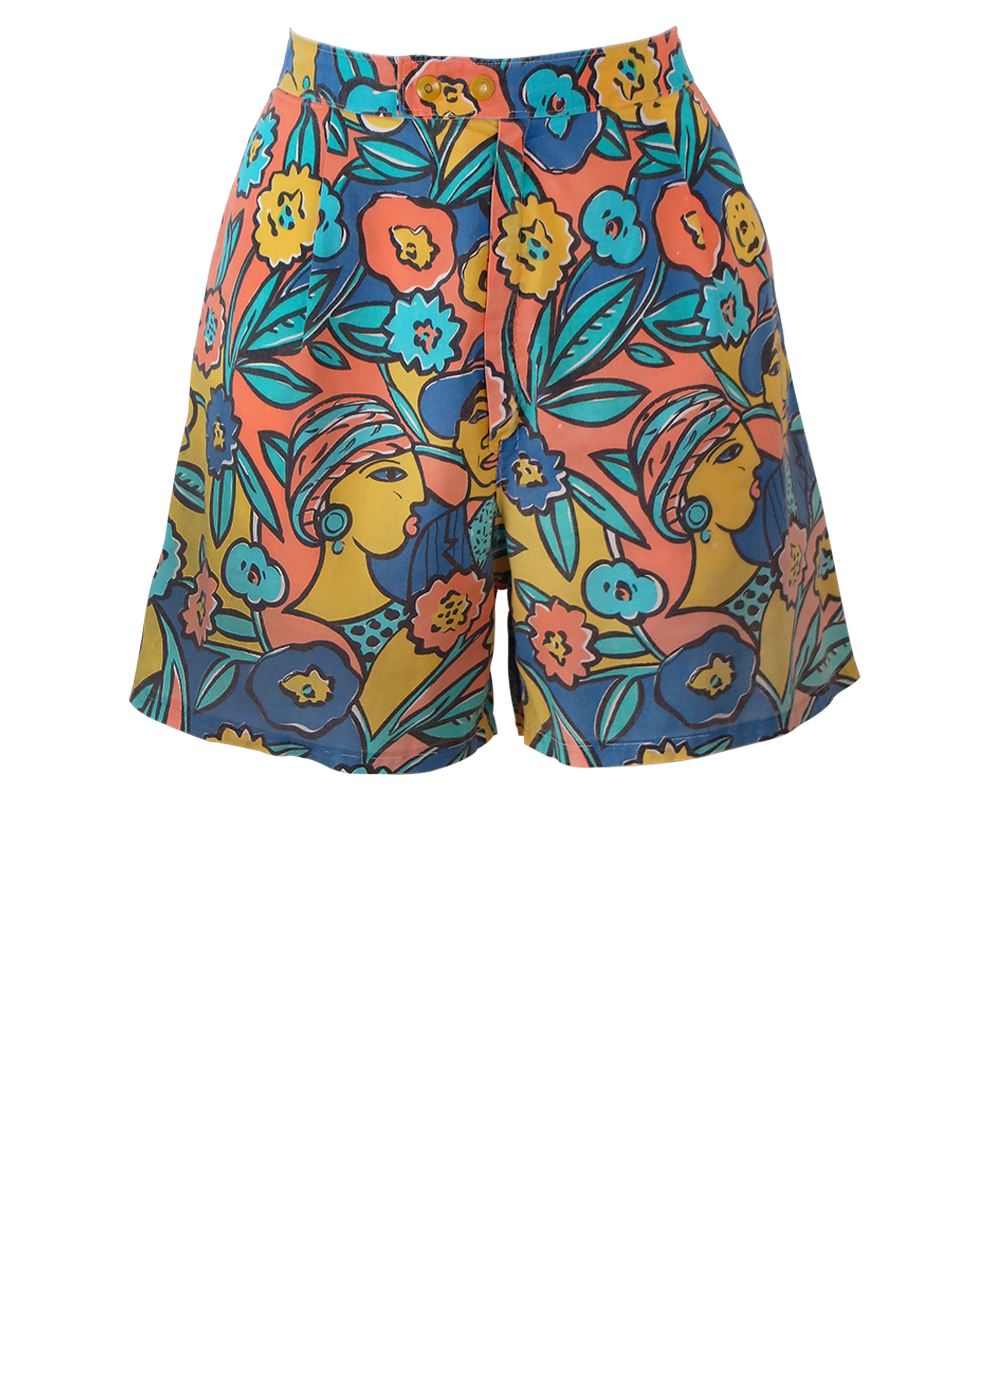 Patterned Shorts with Faces & Flowers Imagery in Orange, Yellow & Blue ...